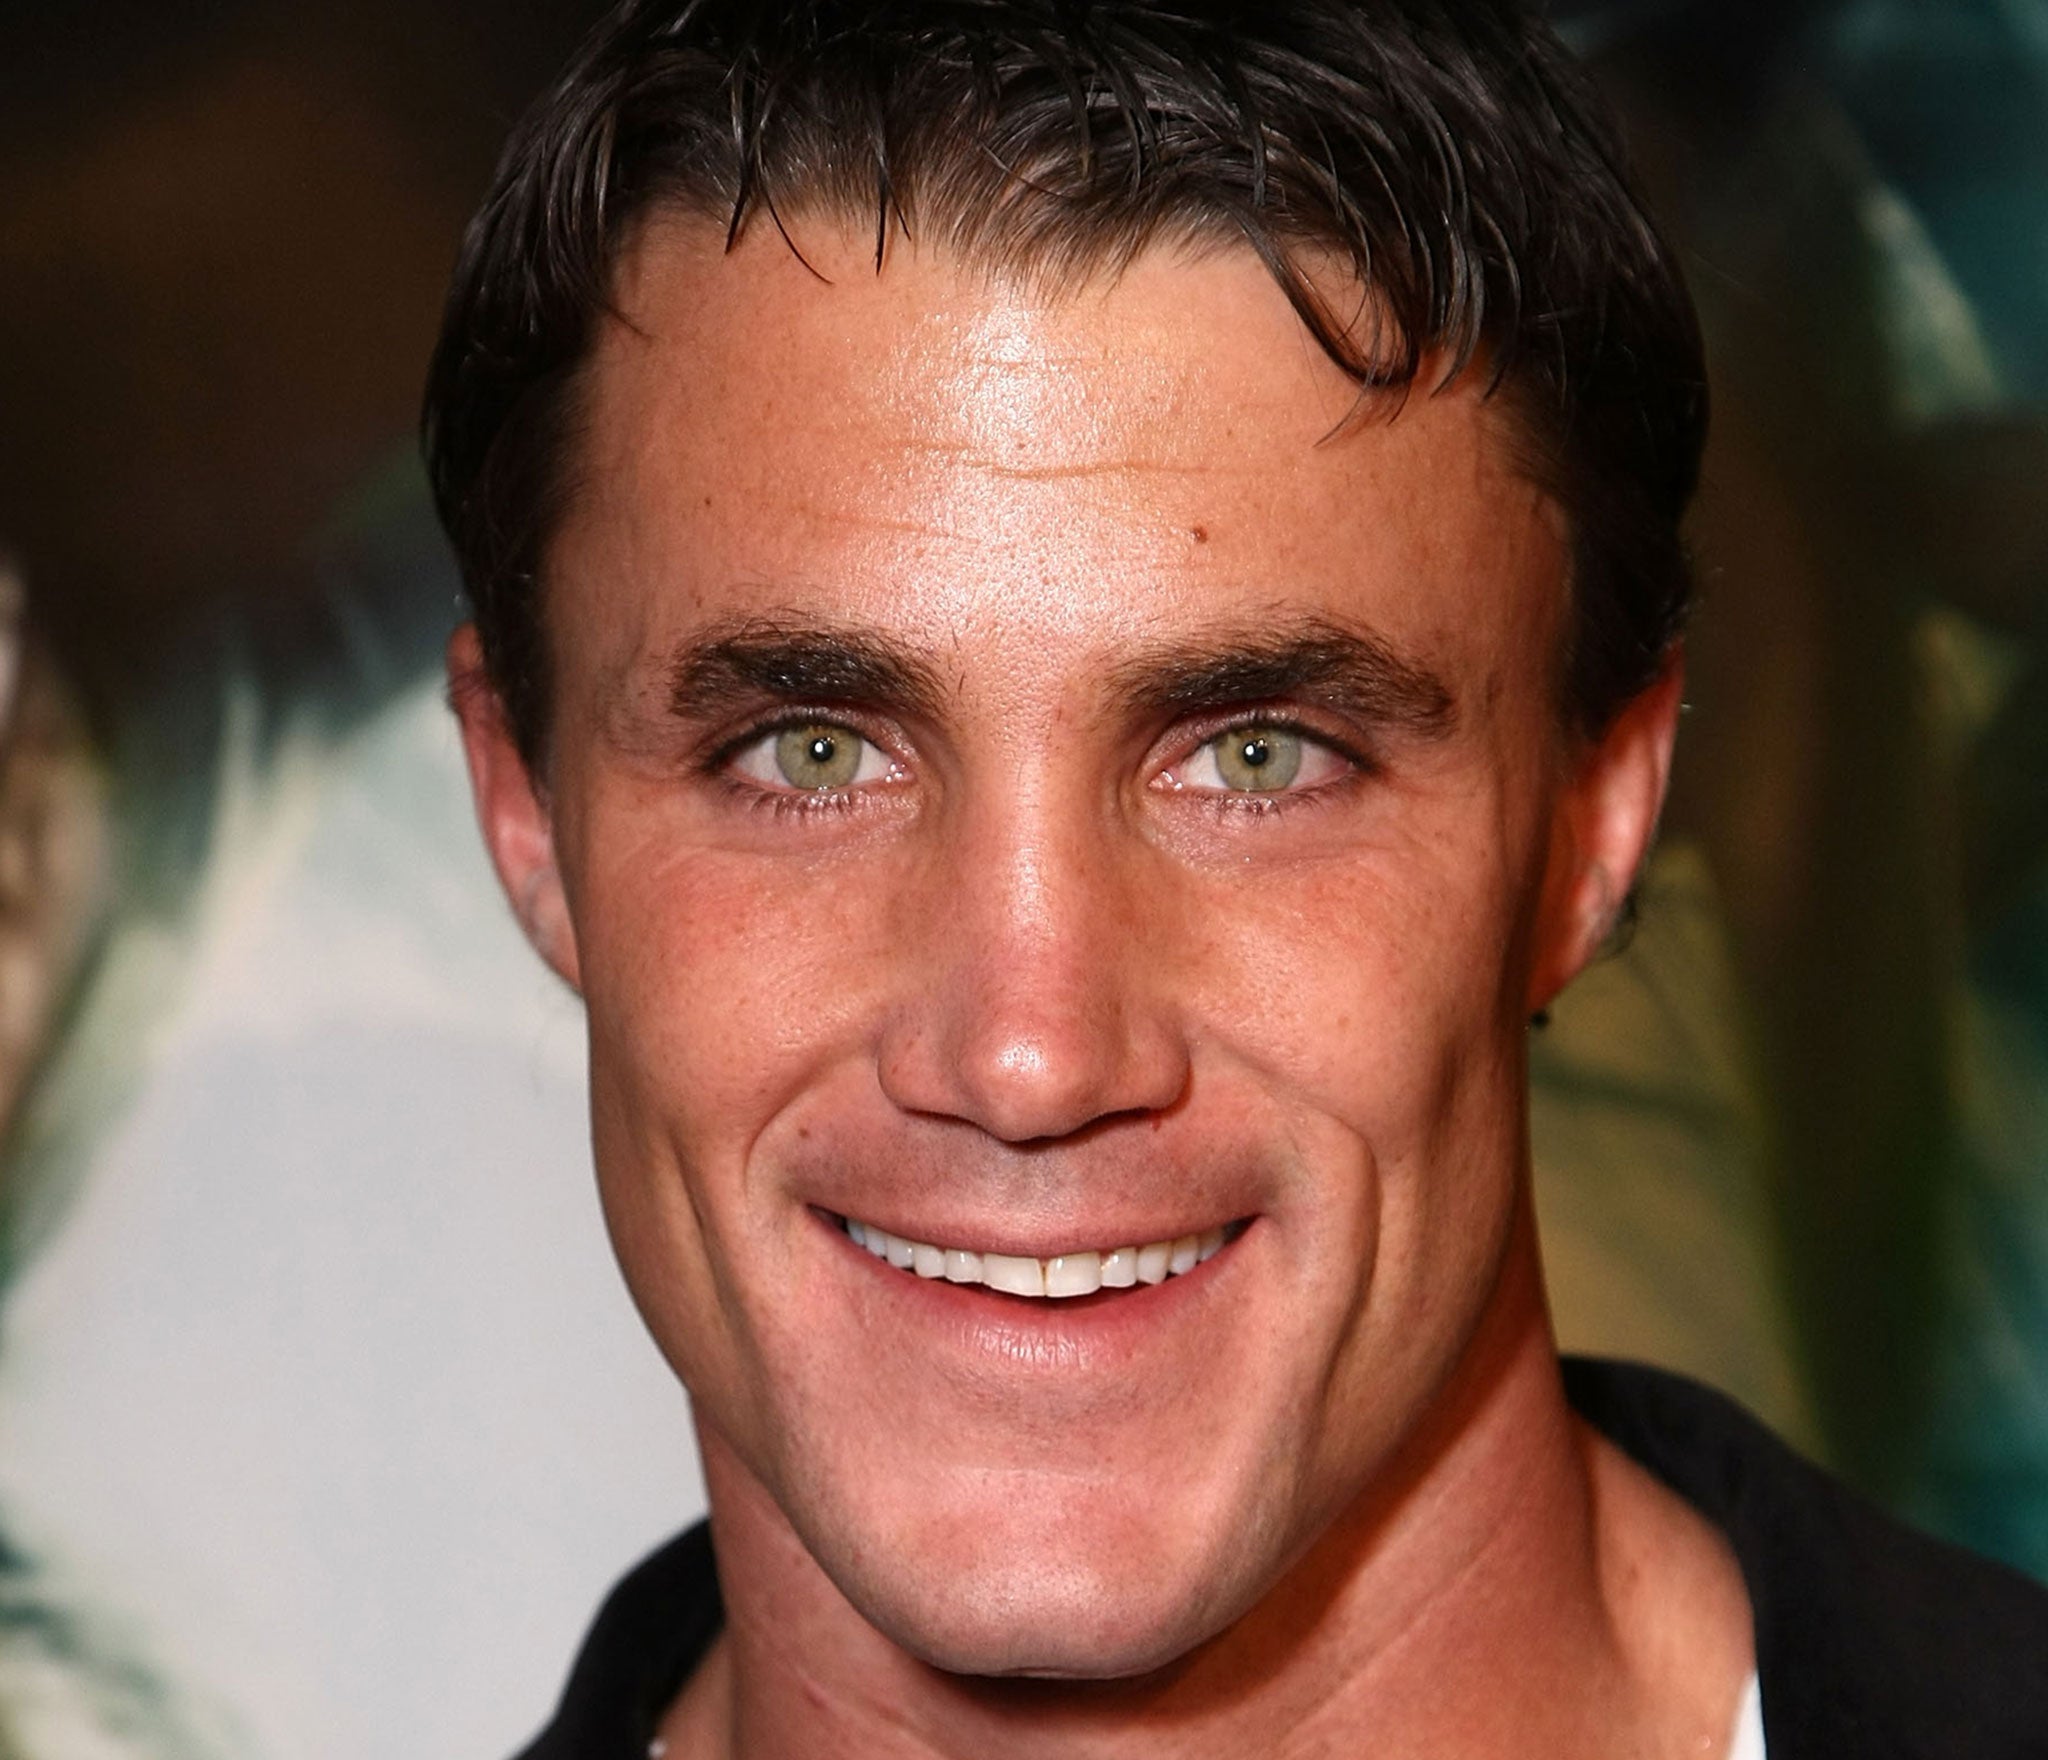 Greg Plitt has died aged 37 after being struck by a train